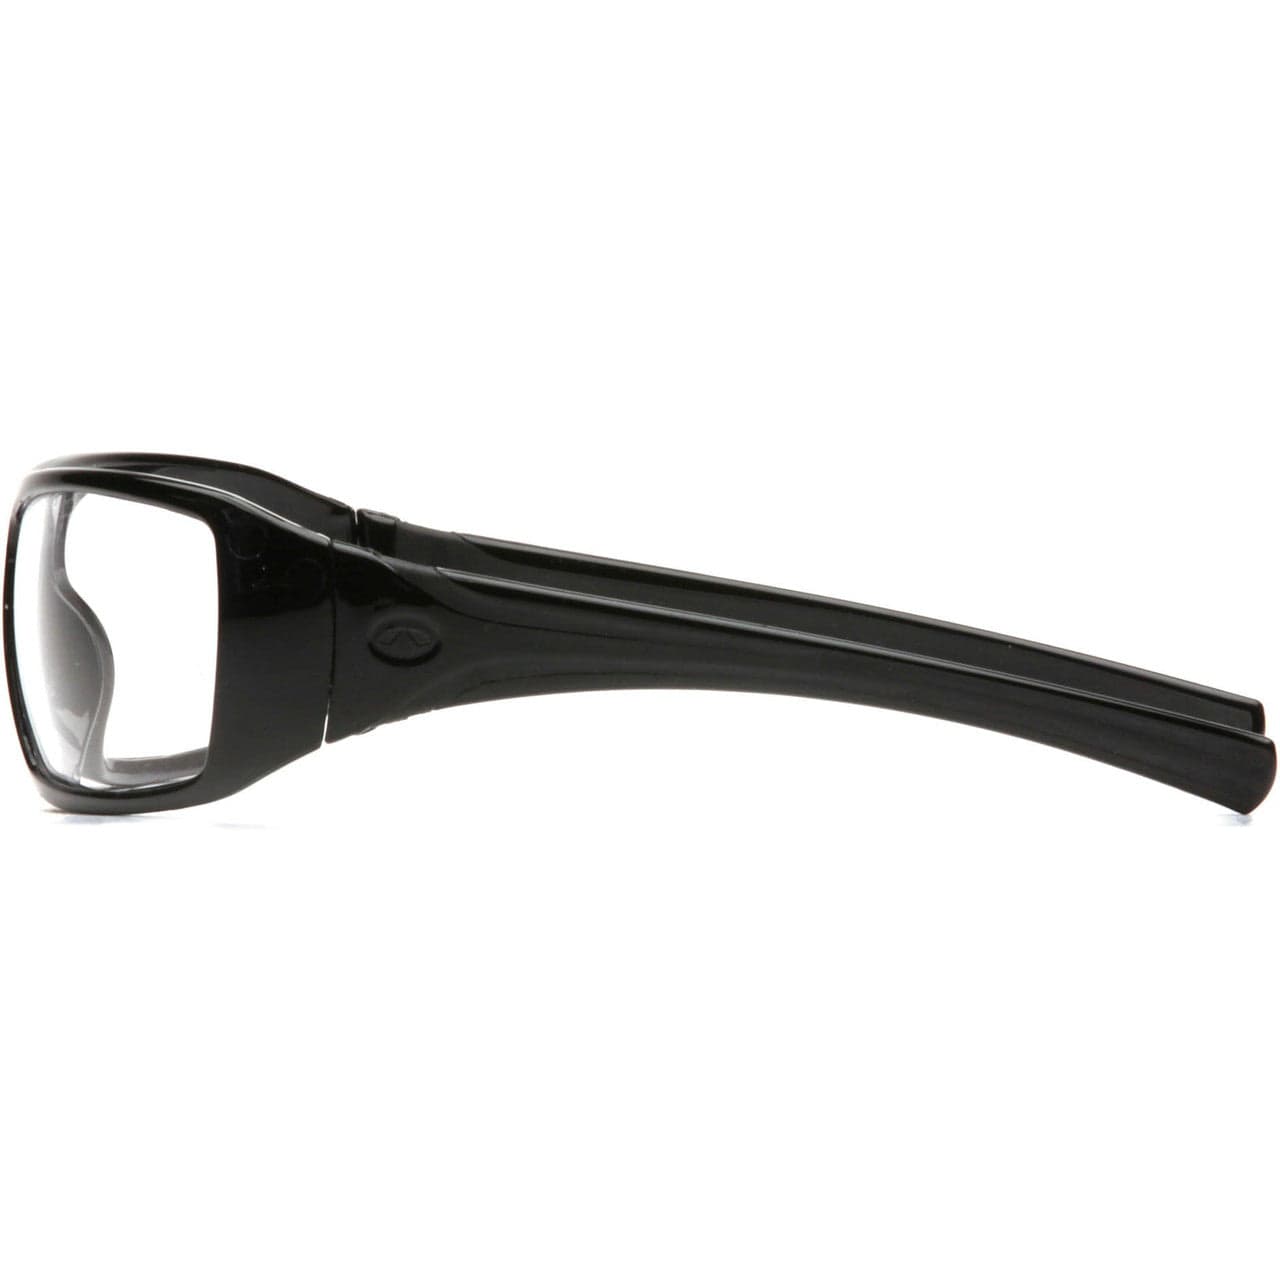 Pyramex Goliath Safety Glasses with Black Frame and Clear Lens SB5610D Side View